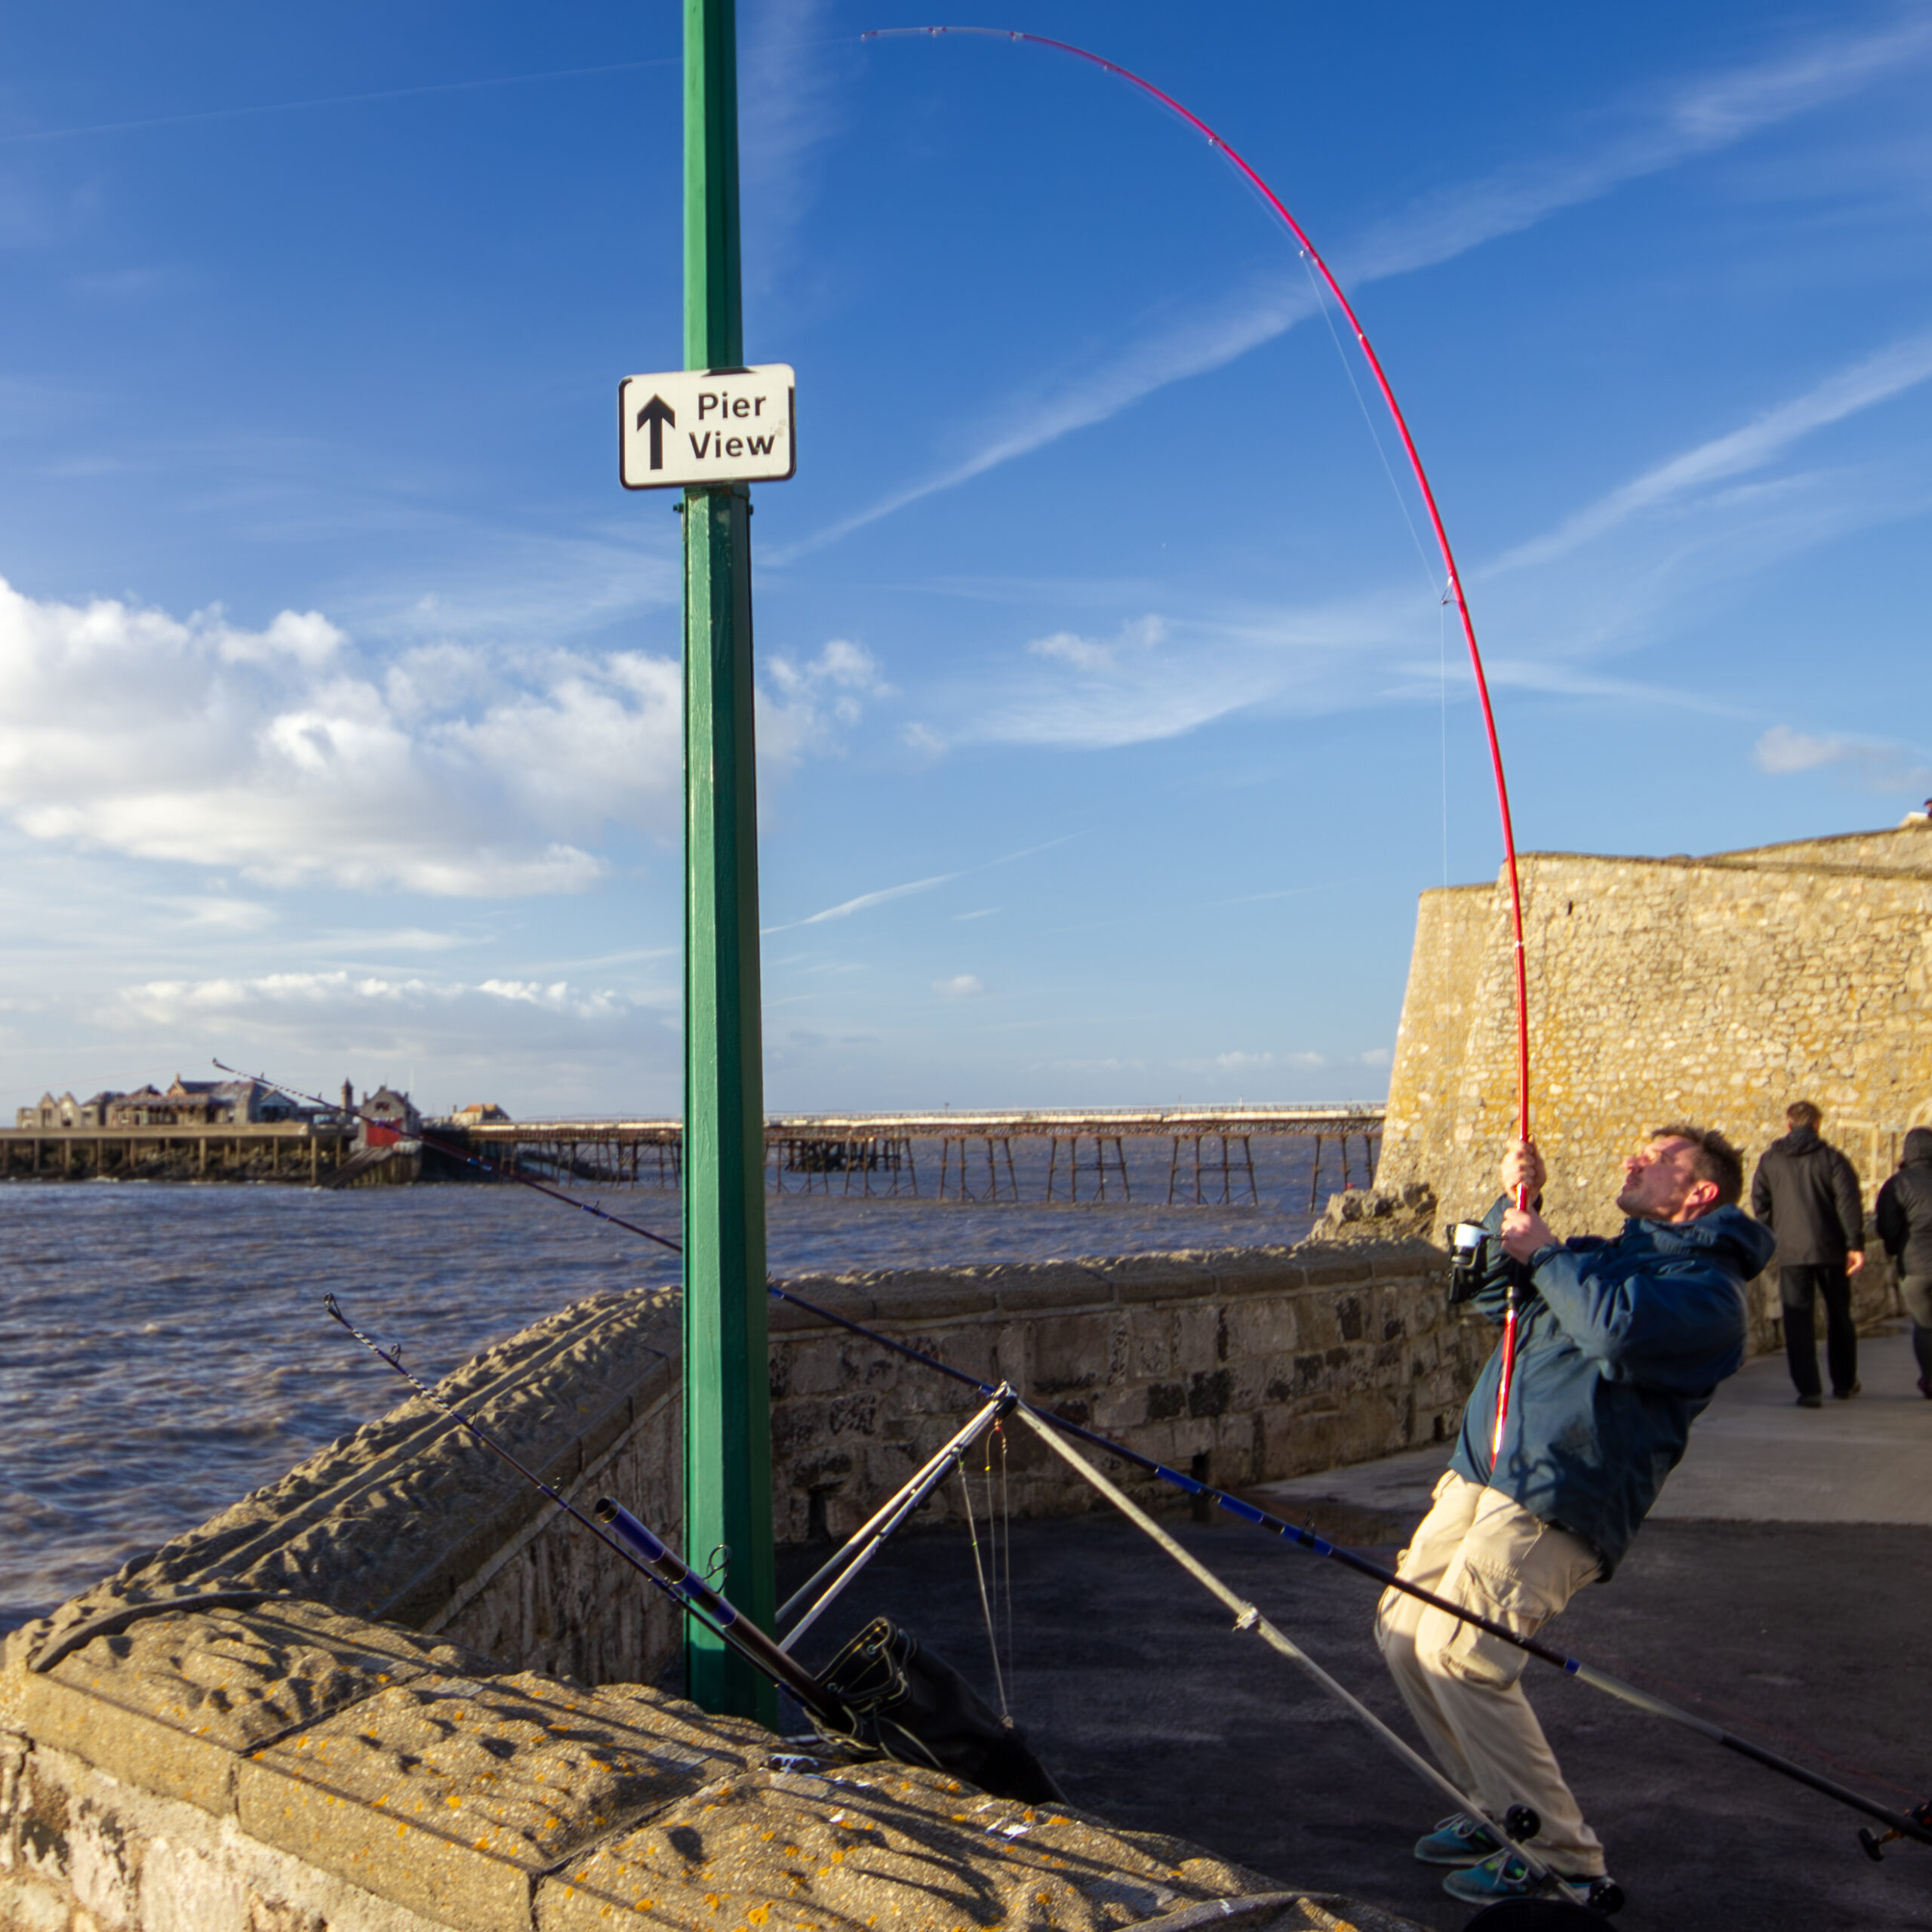 Sea Fishing Lines - What Should We Use For Beach Casting? - Veals